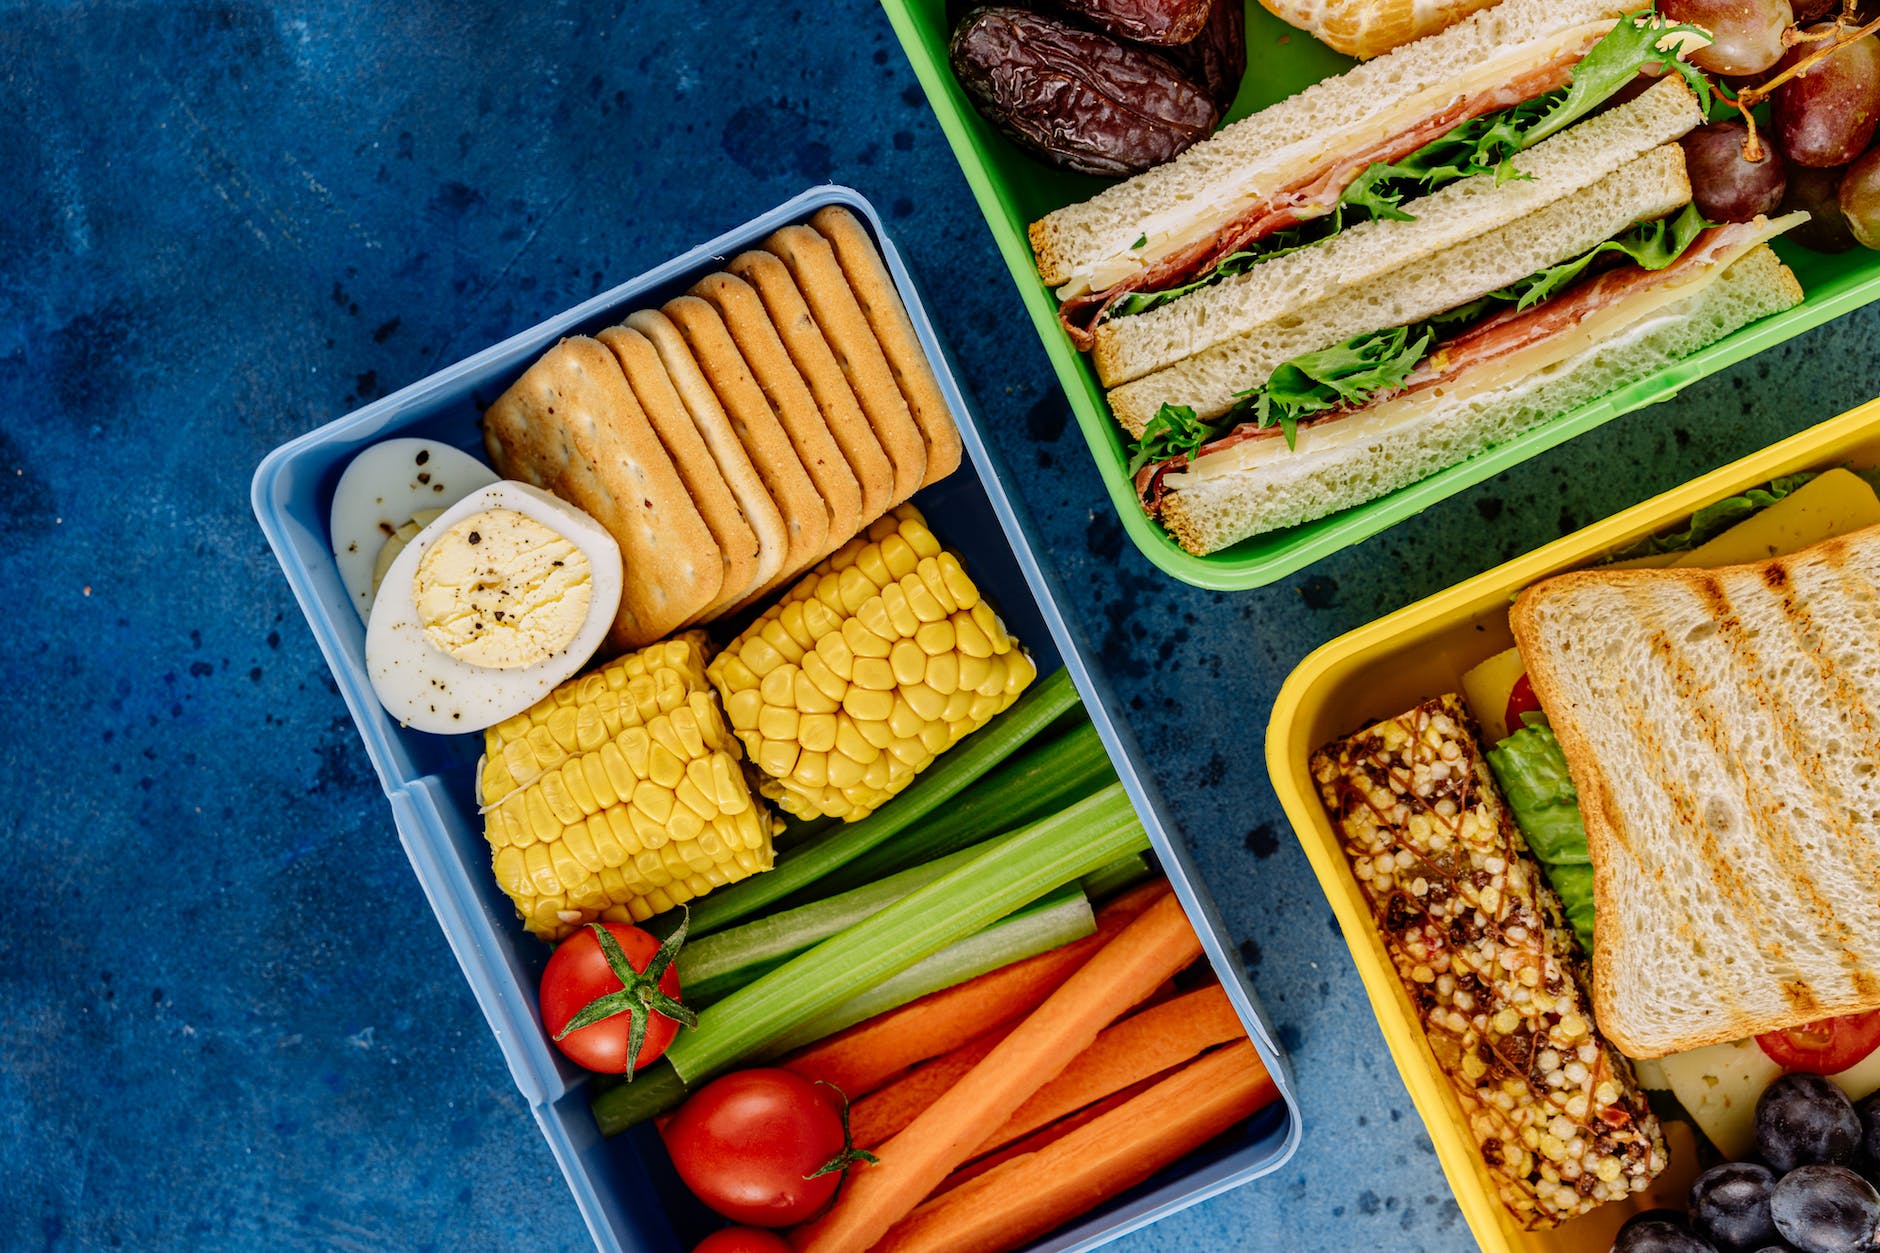 healthy lunchboxes